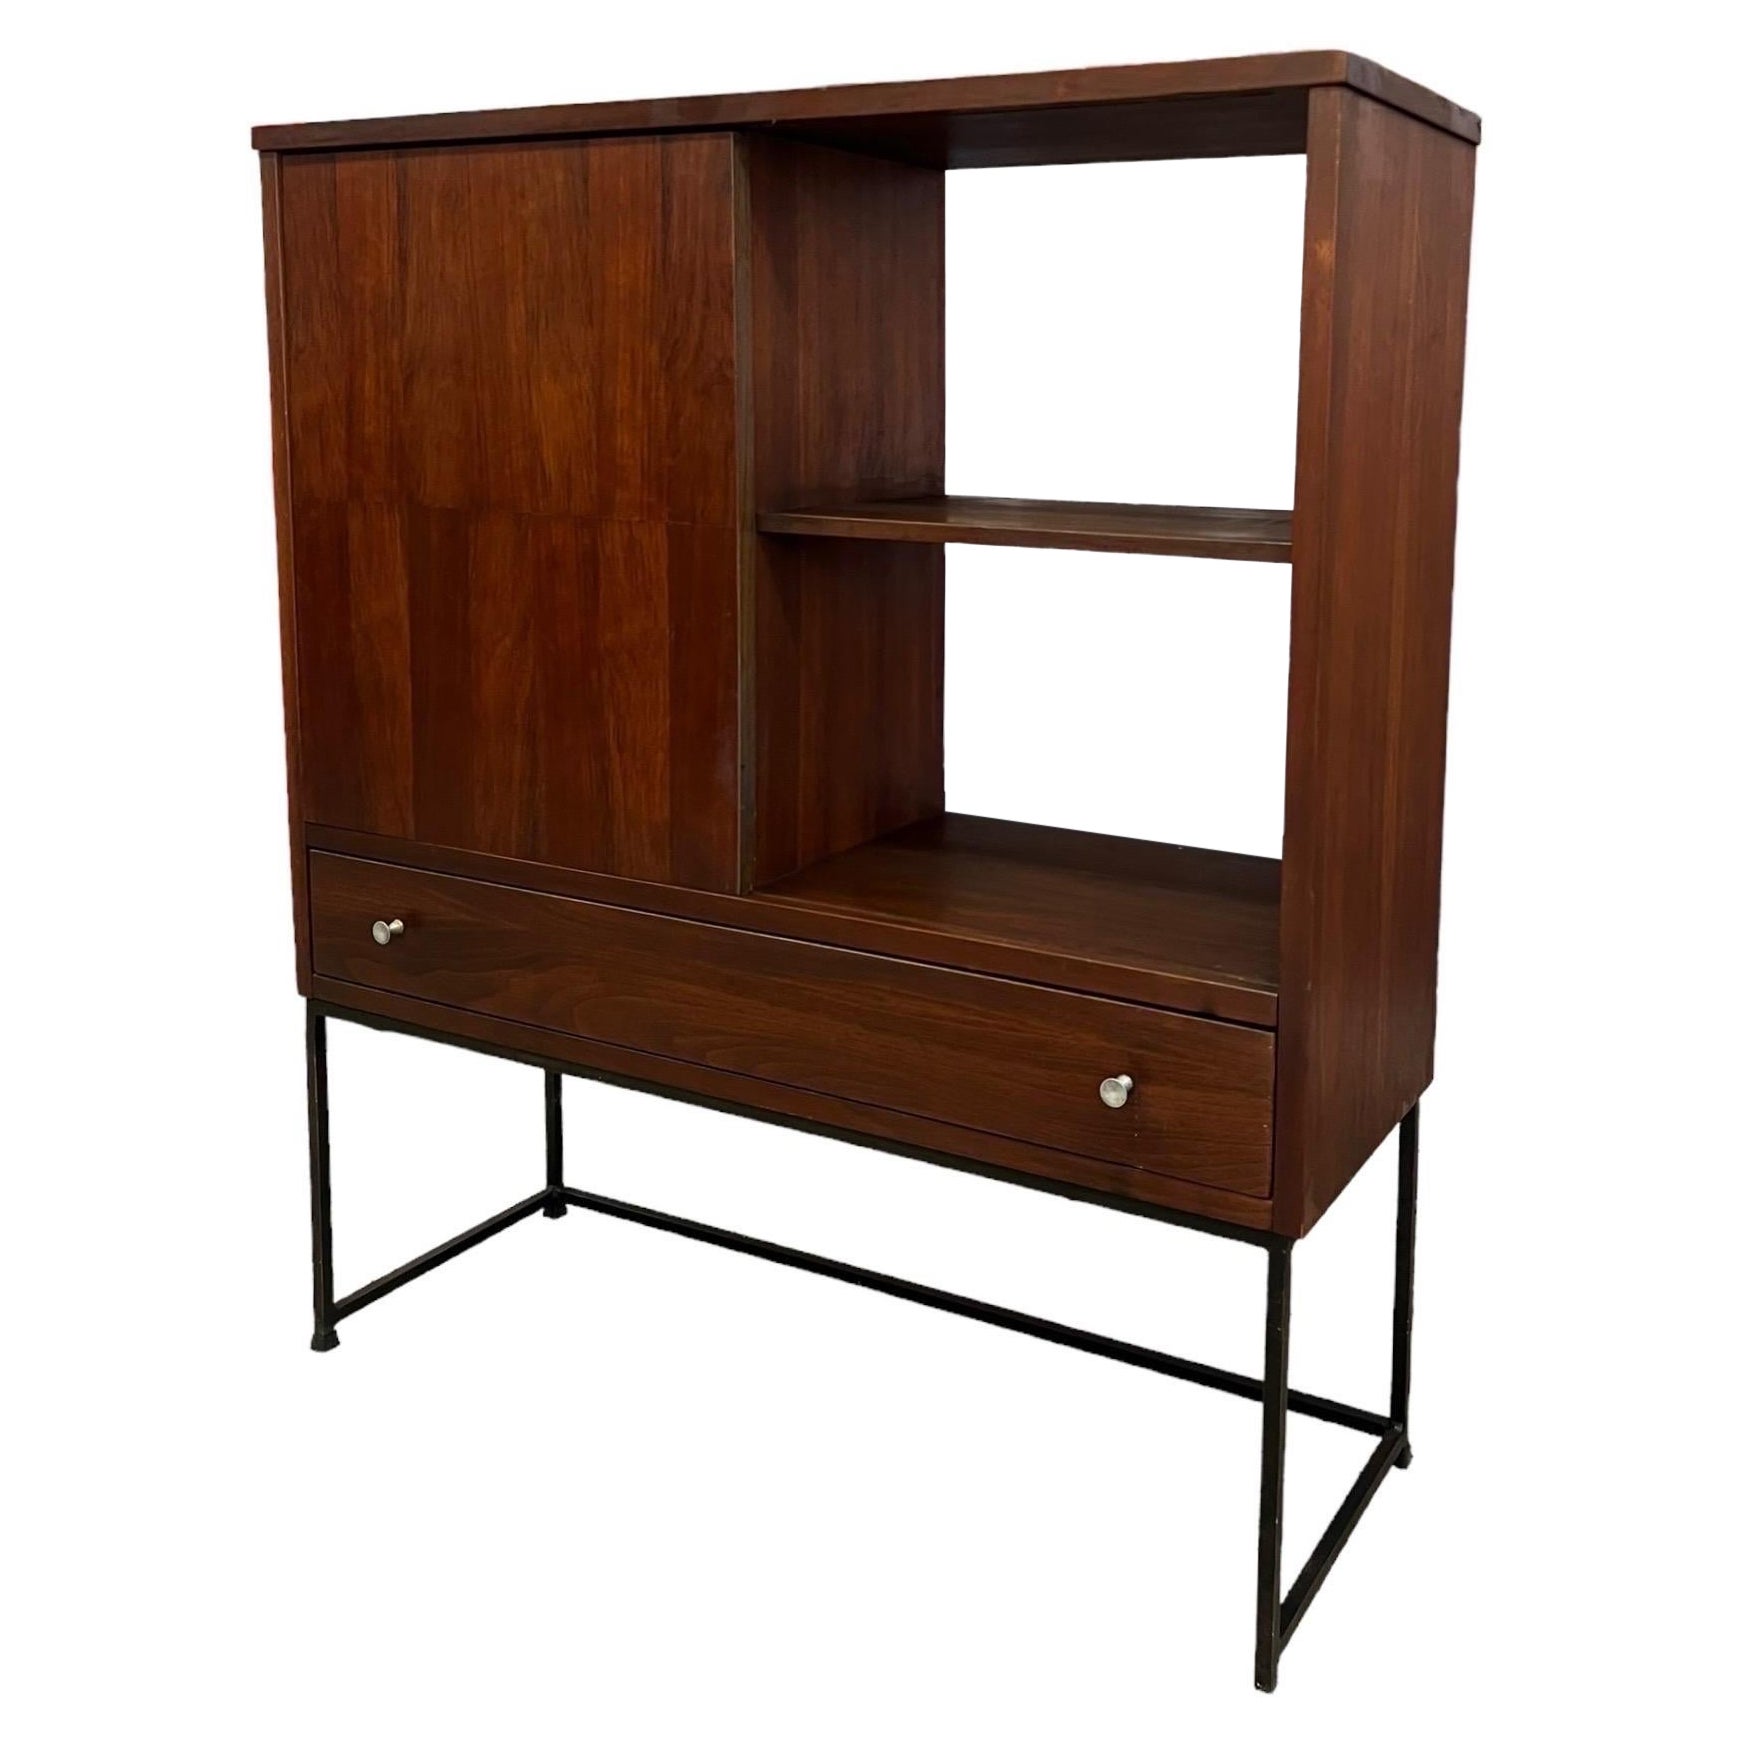 Vintage Mid Century Modern Bookshelf With Sliding Door and Dovetailed Drawers For Sale